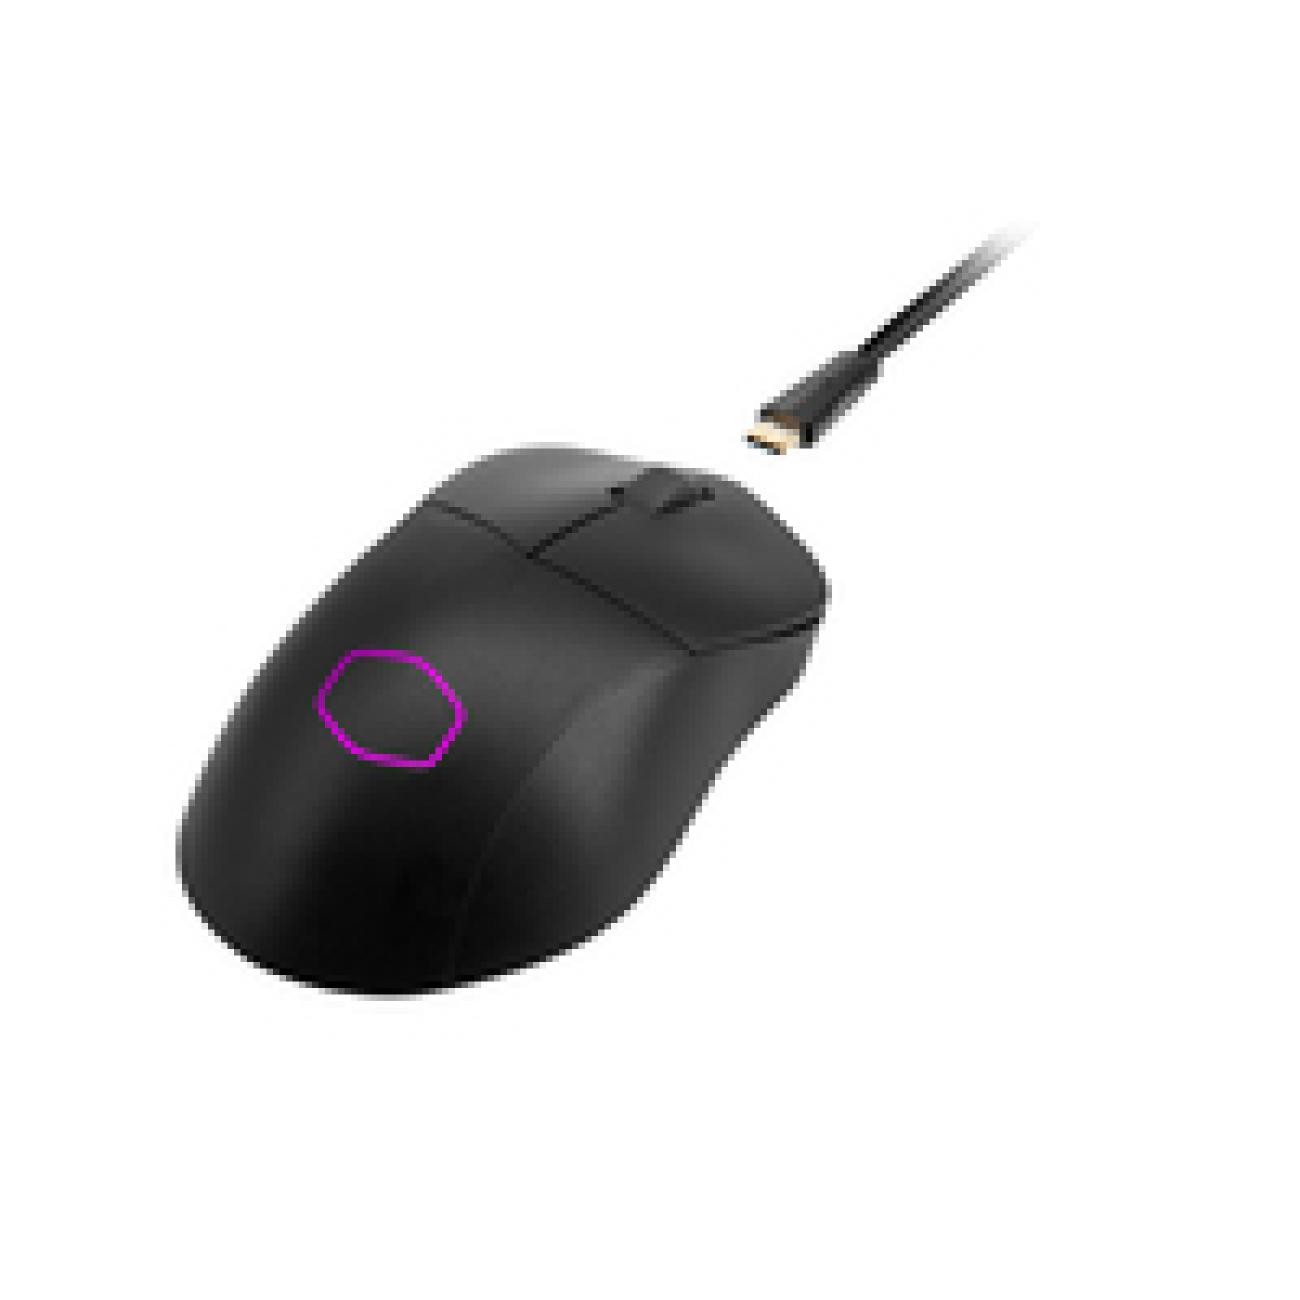 CM Mouse Gaming MM731 Black Matte,HYBRID WIRELESS,Claw&Palm,ABS Plastic Rubber PTFE,PixArt...